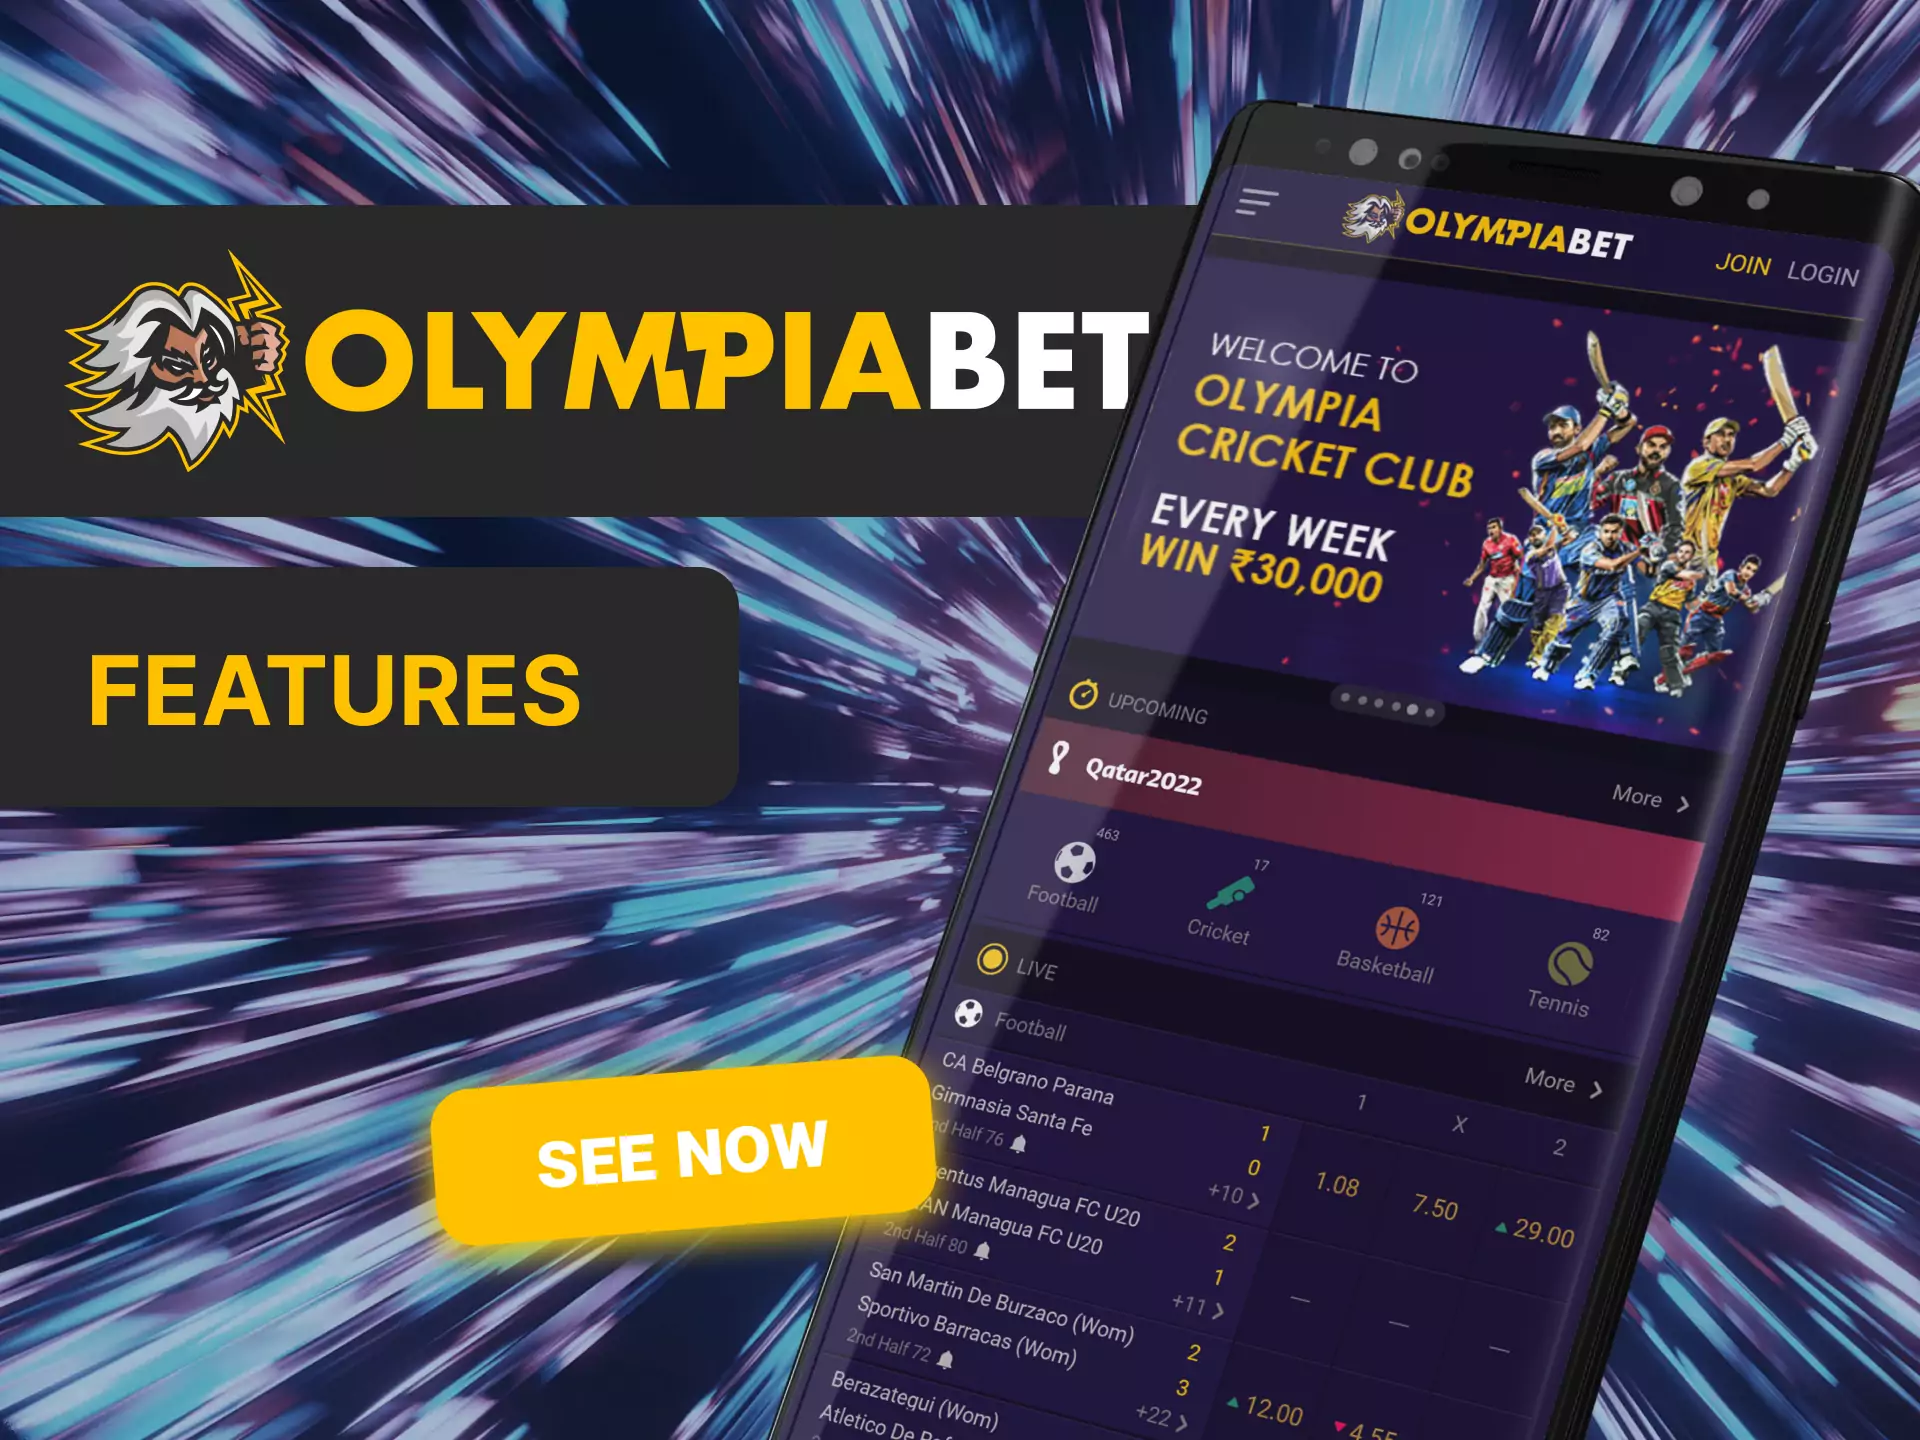 OlympiaBet offers its users convenient features and an intuitive interface.